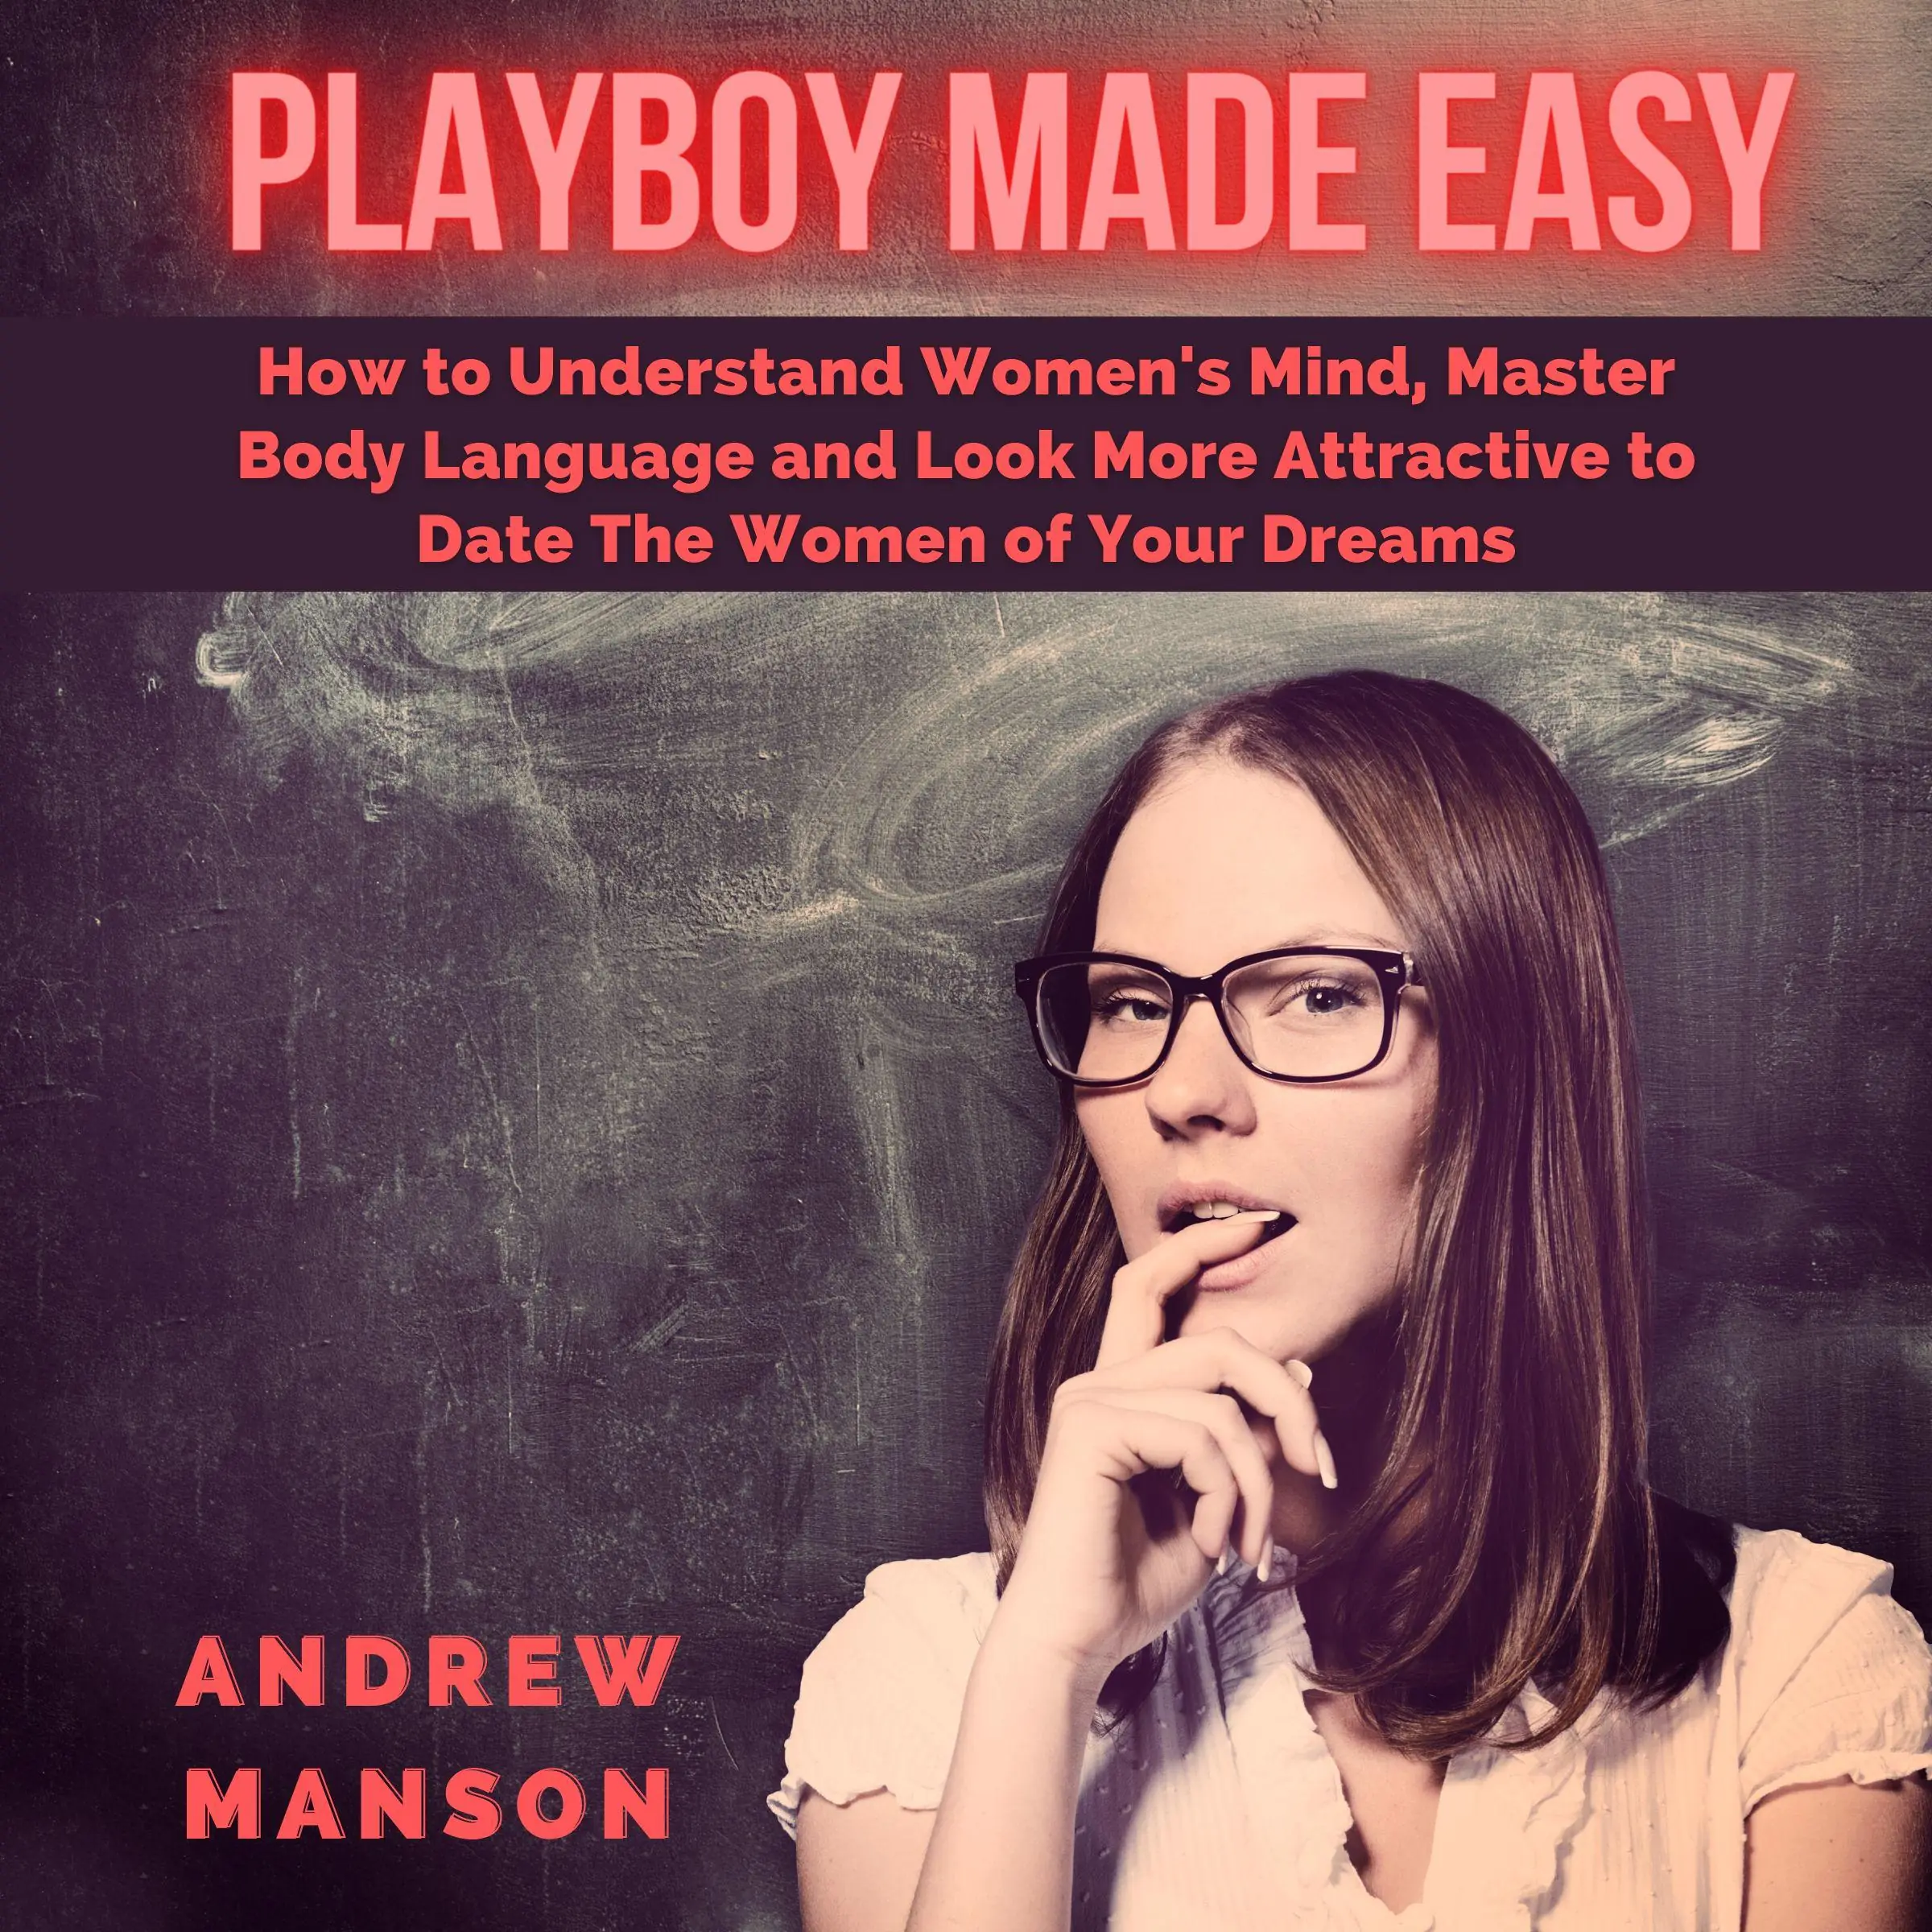 Playboy Made Easy: How to Understand Women's Mind, Master Body Language and Look More Attractive to Date The Women of Your Dreams Audiobook by Andrew Manson